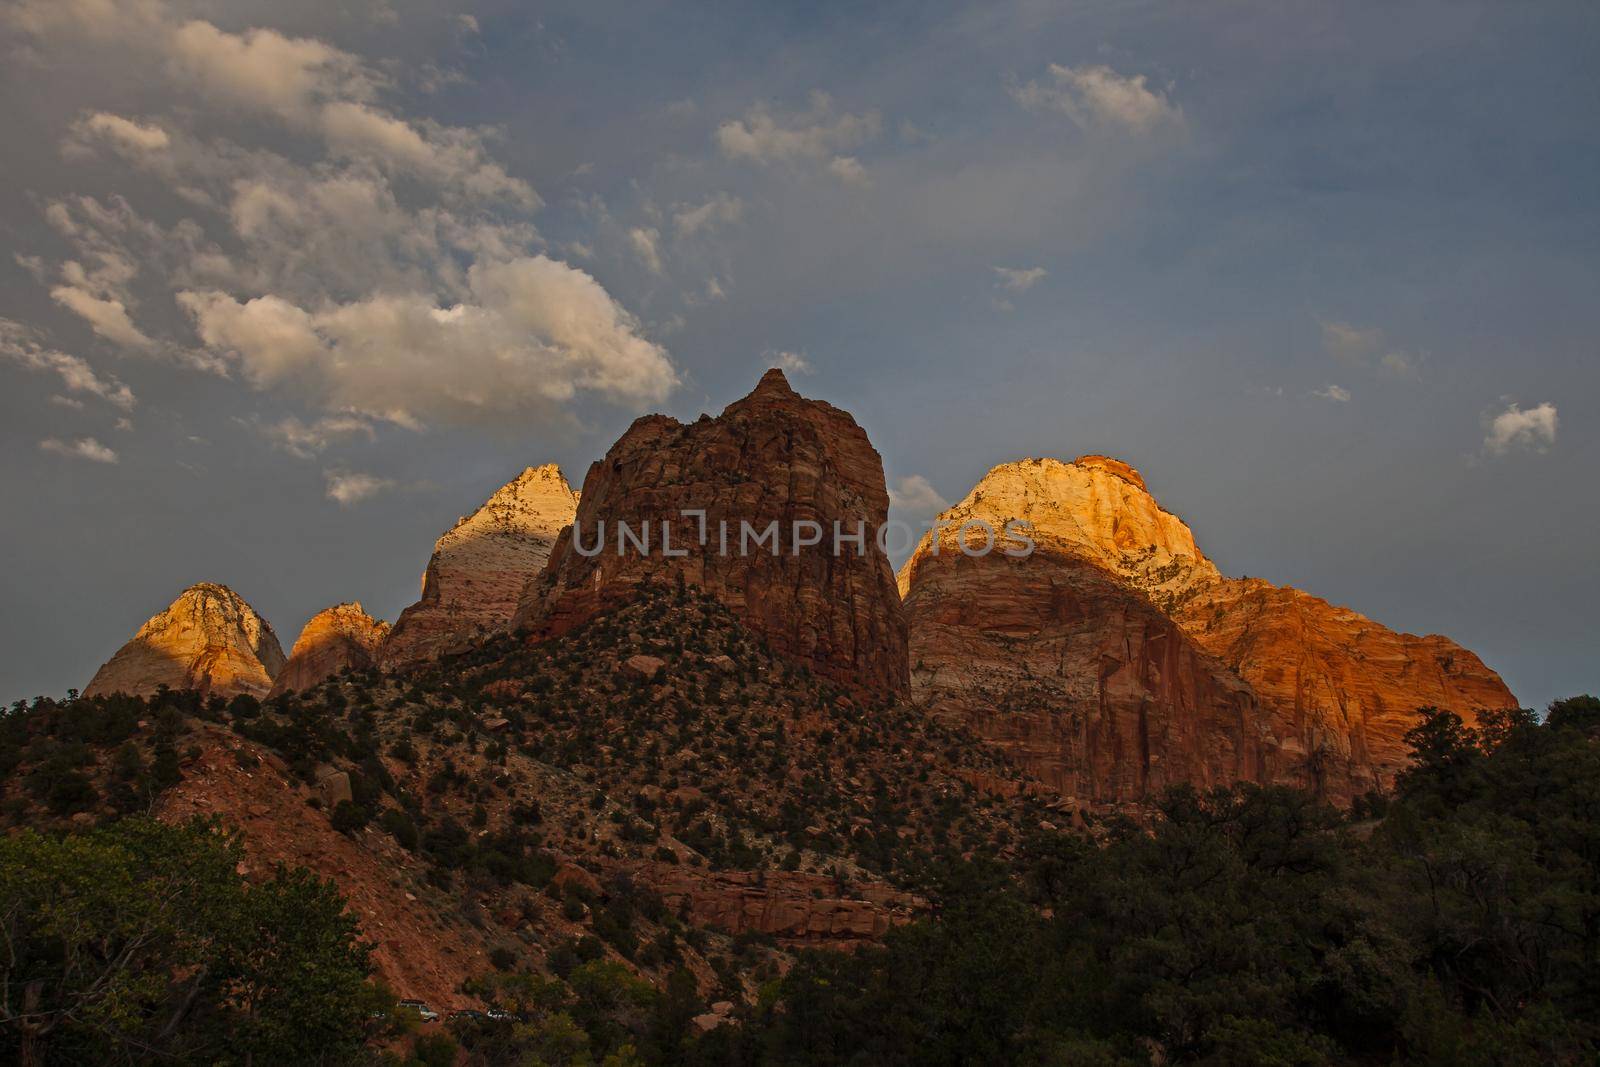 Breathtaking scenery along the easy and accessable Pa’rus trail in the Zion National Park. Utah